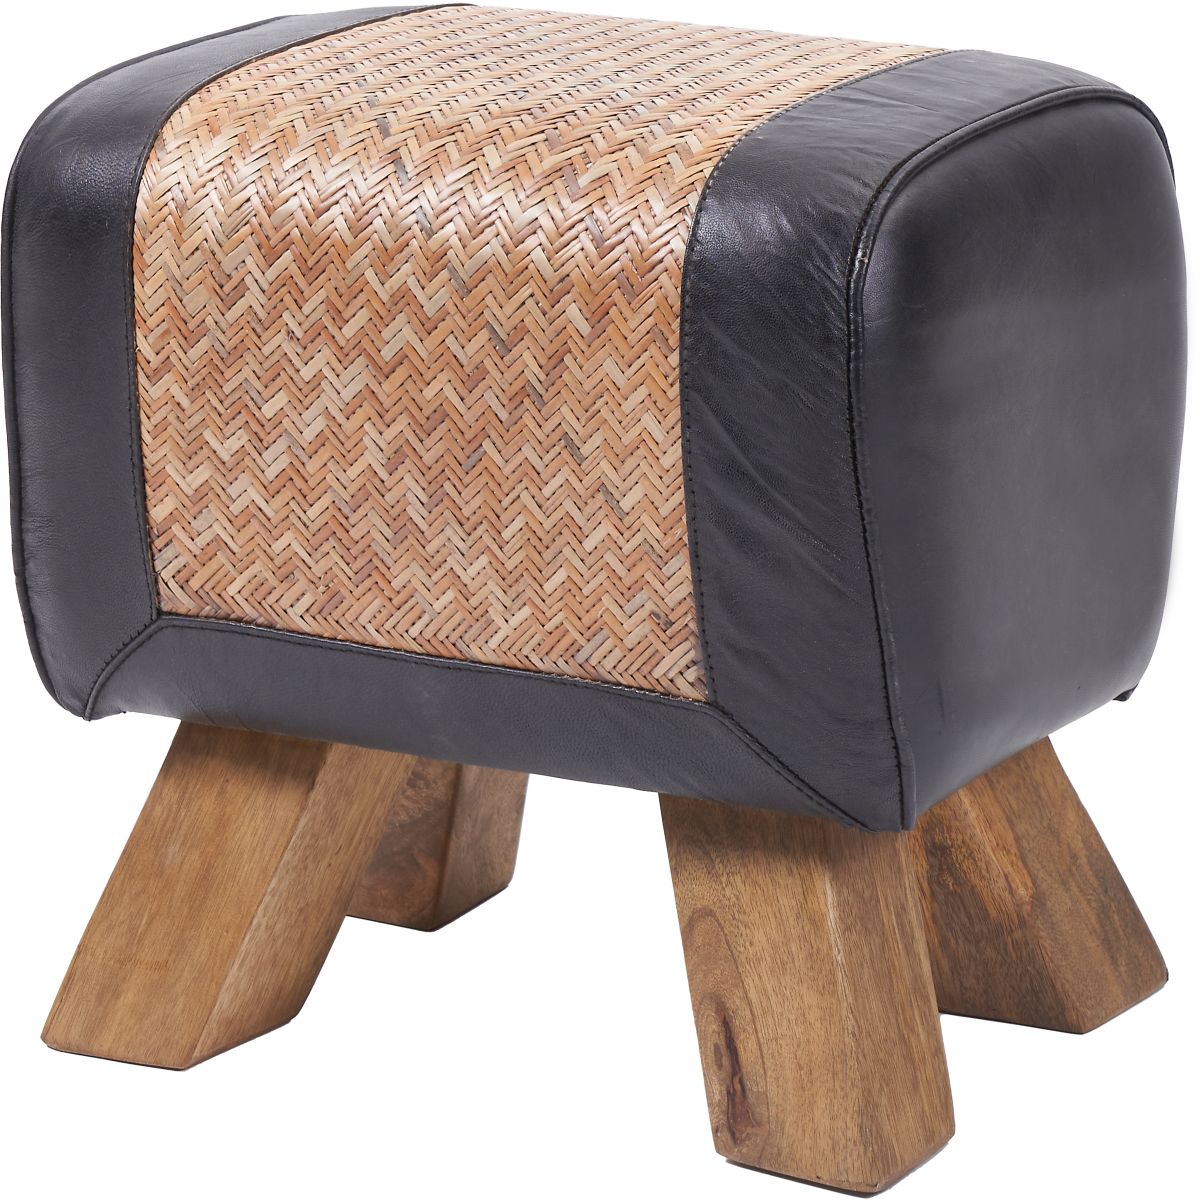 Pommello Black  Leather, Woven Rattan and Wood Stool